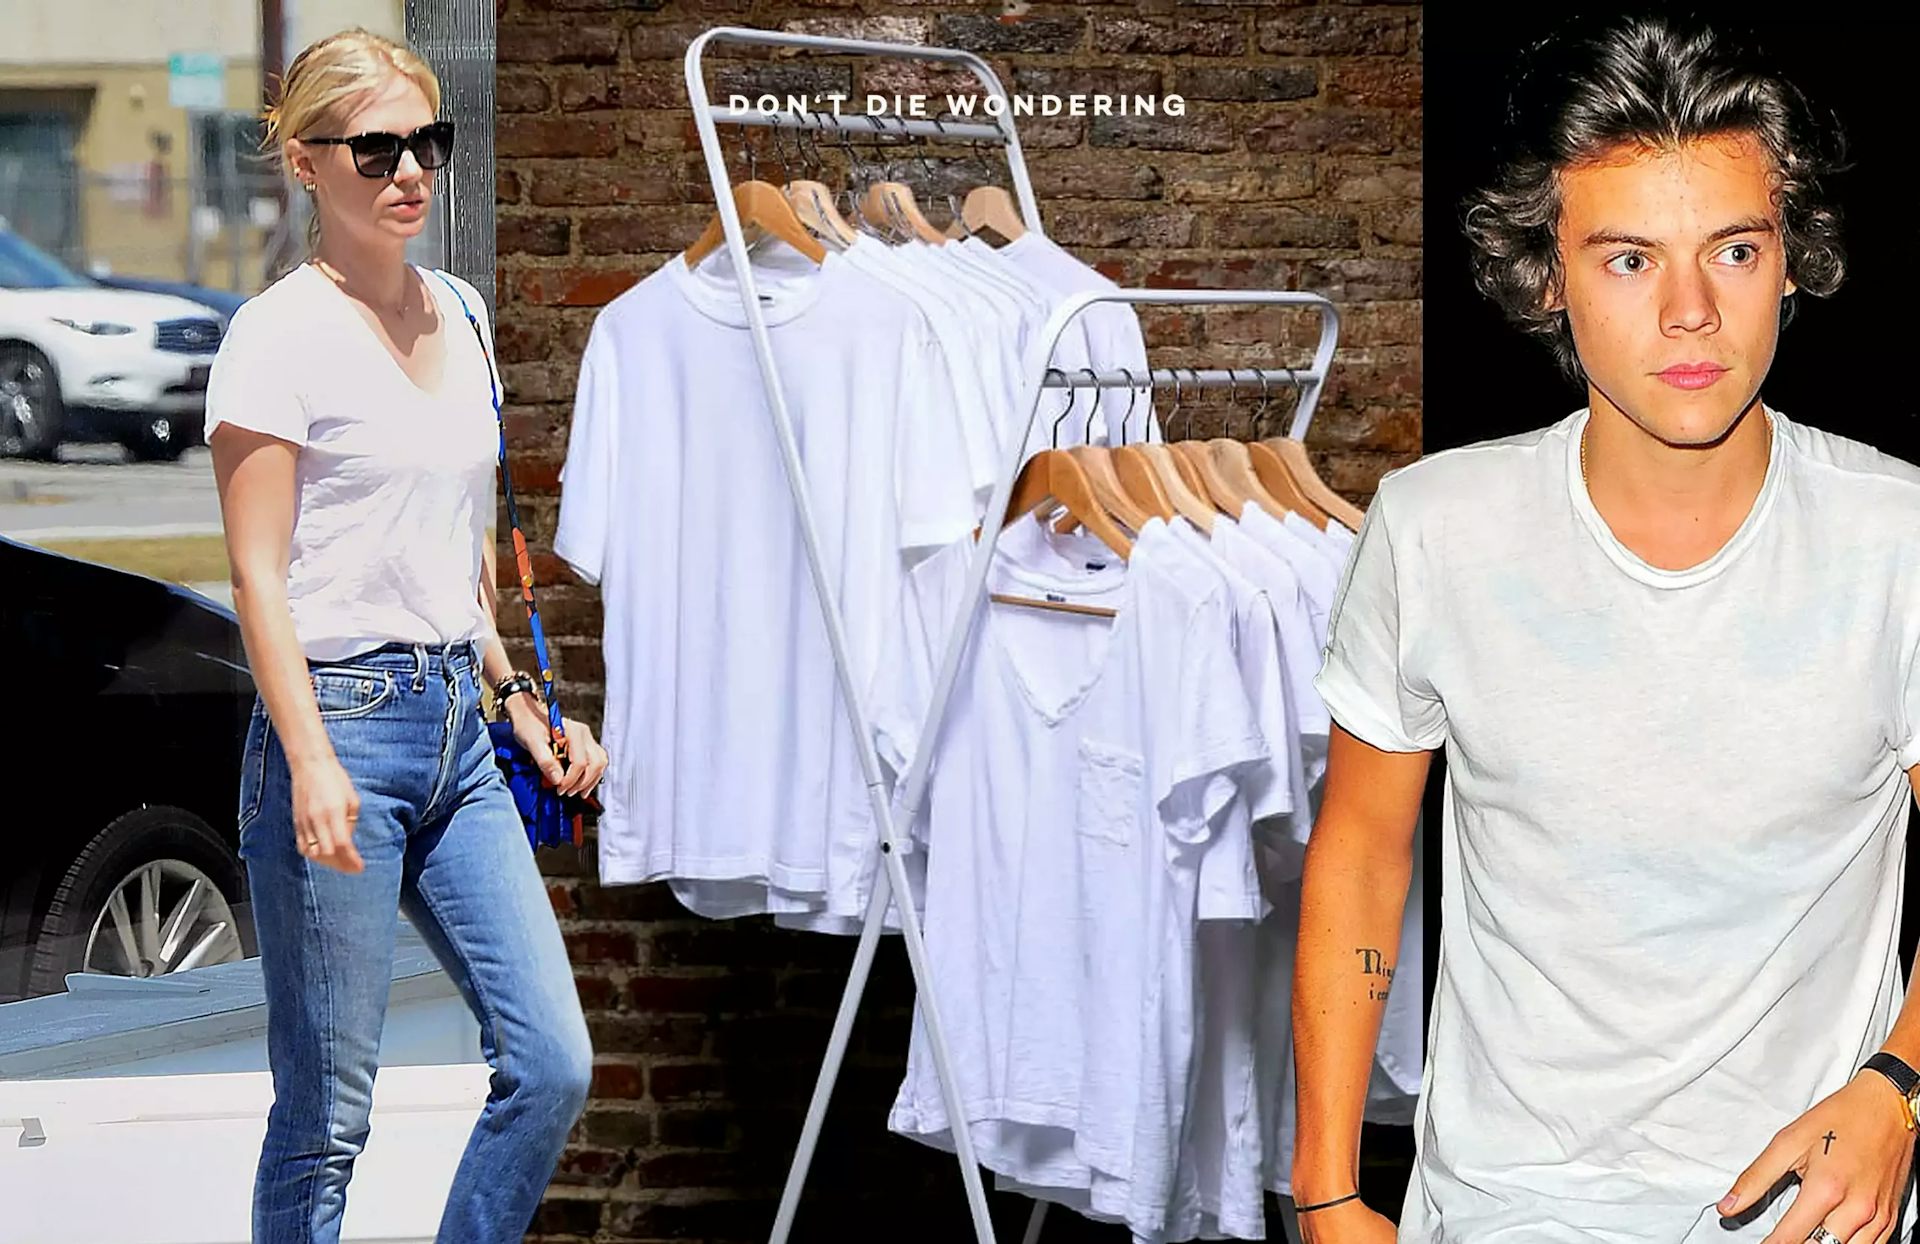 The Ultimate White T-Shirt